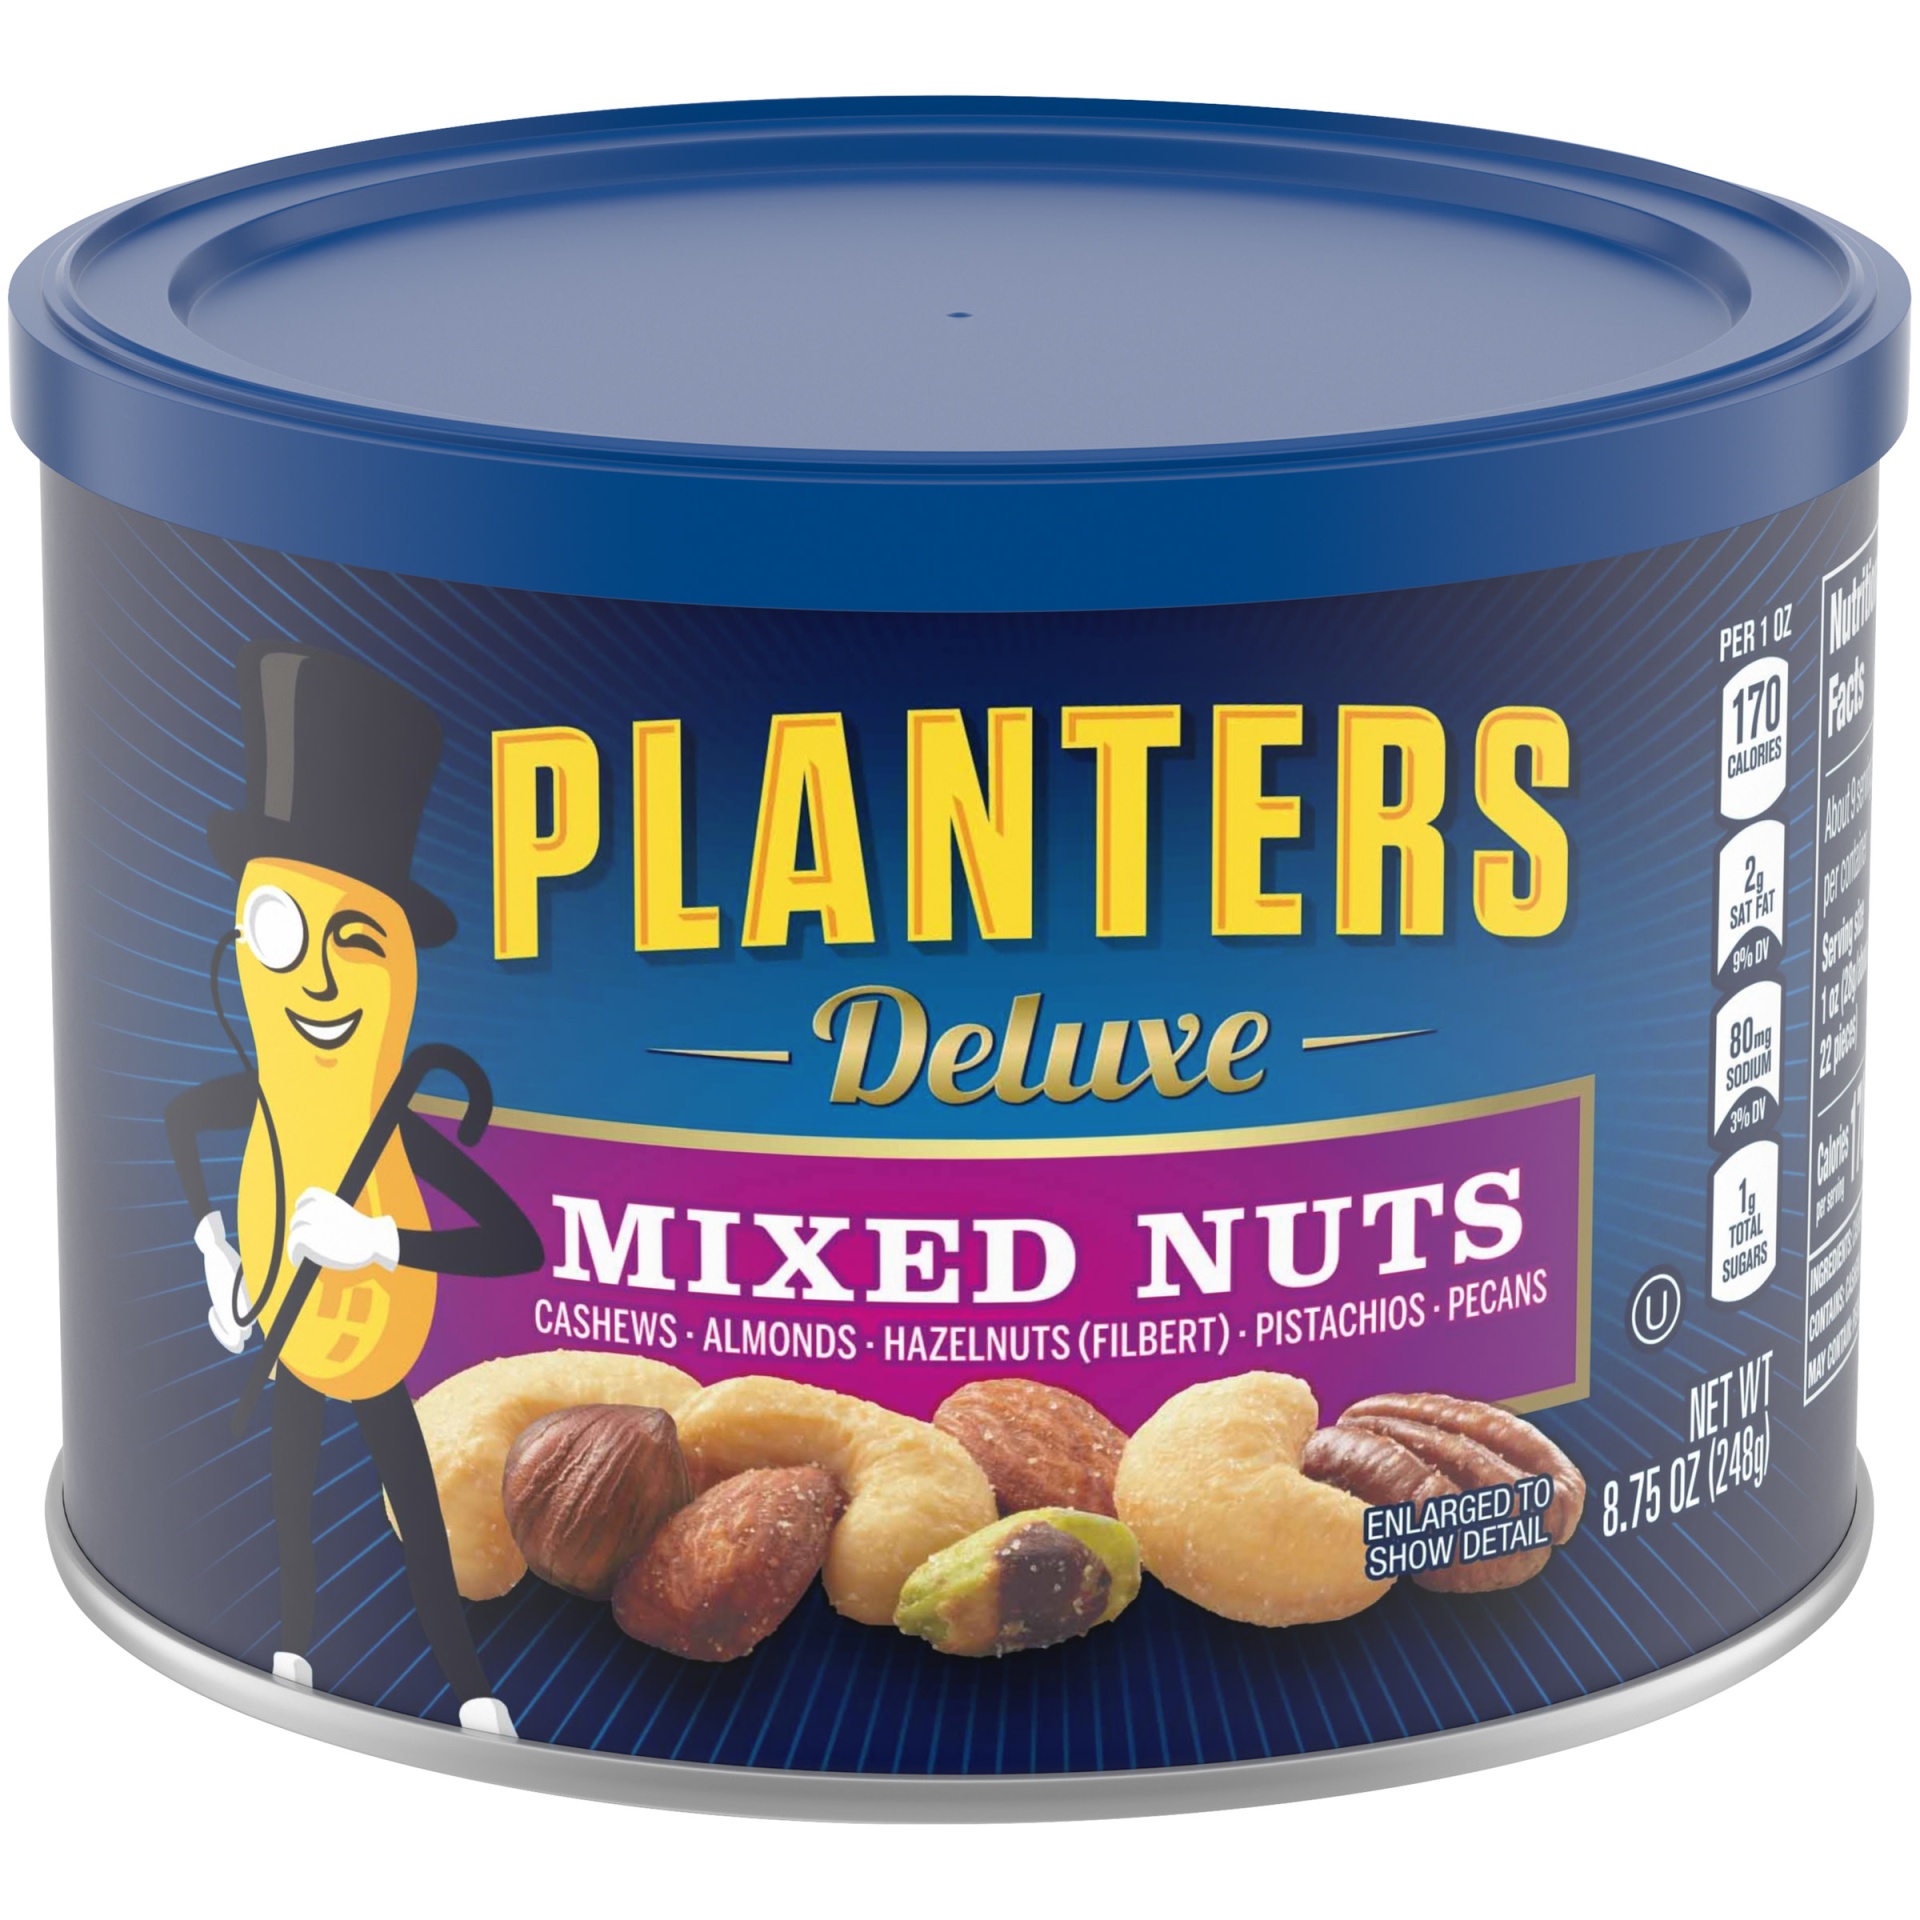 slide 1 of 2, Planters Deluxe Mixed Nuts with Cashews, Almonds, Hazelnuts, Pistachios & Pecans, 8.75 oz